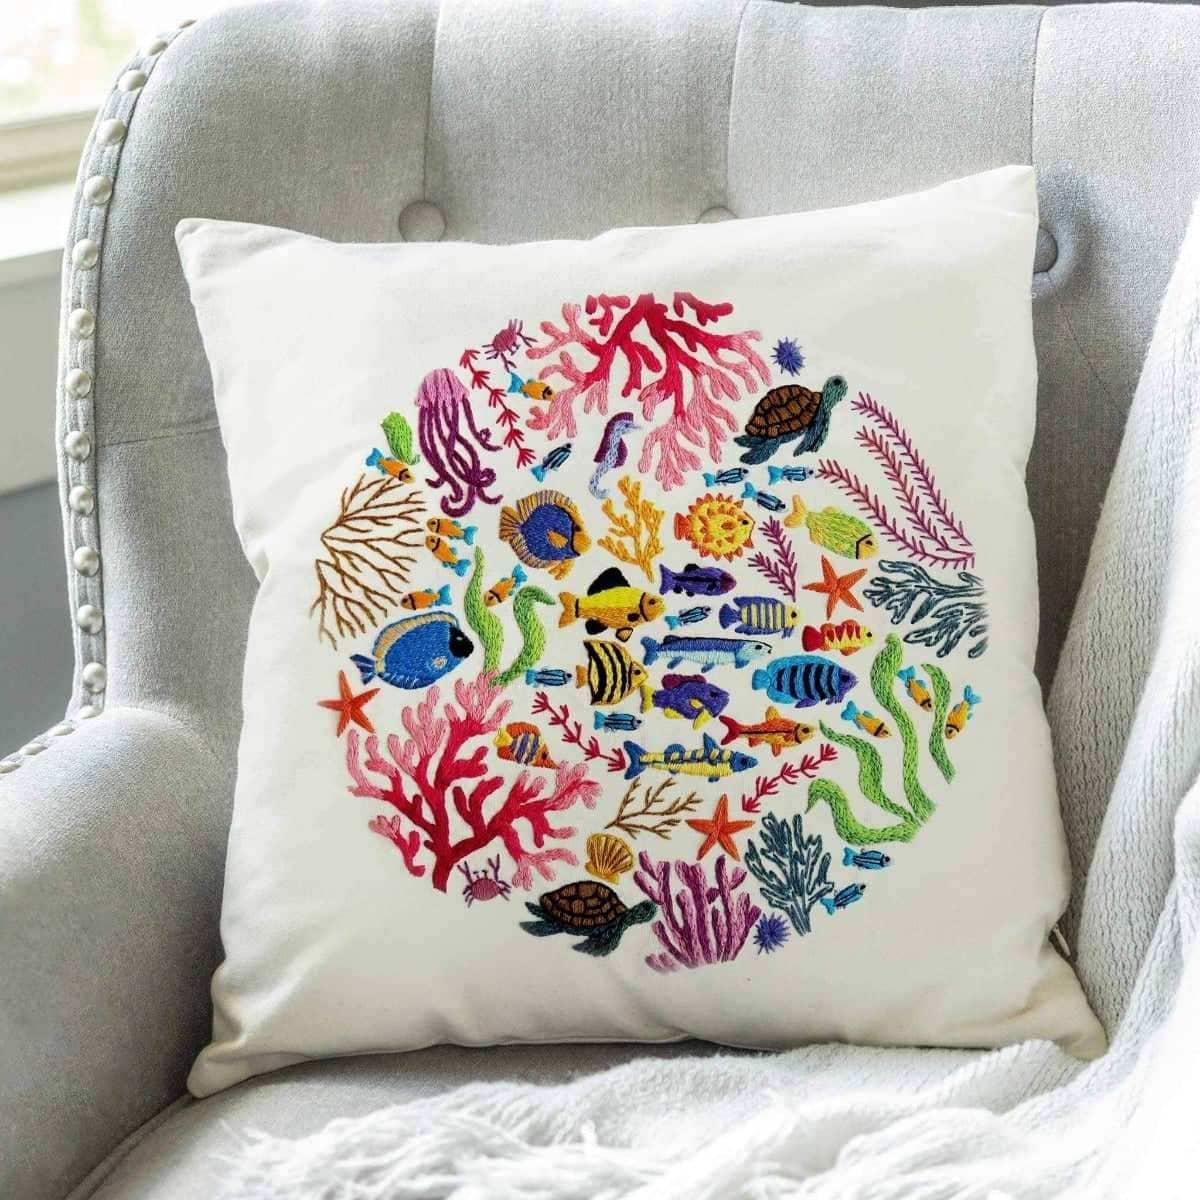 Ocean Wonders, Hand Embroidery Kit , Embroidery Kit , StitchDoodles , Embroidery, embroidery hoop kit, Embroidery Kit, embroidery kit for adults, embroidery kit for beginers, hand embroidery, hand embroidery kit, hand stitching, nurge square hoops, PDF pattern , StitchDoodles , shop.stitchdoodles.com